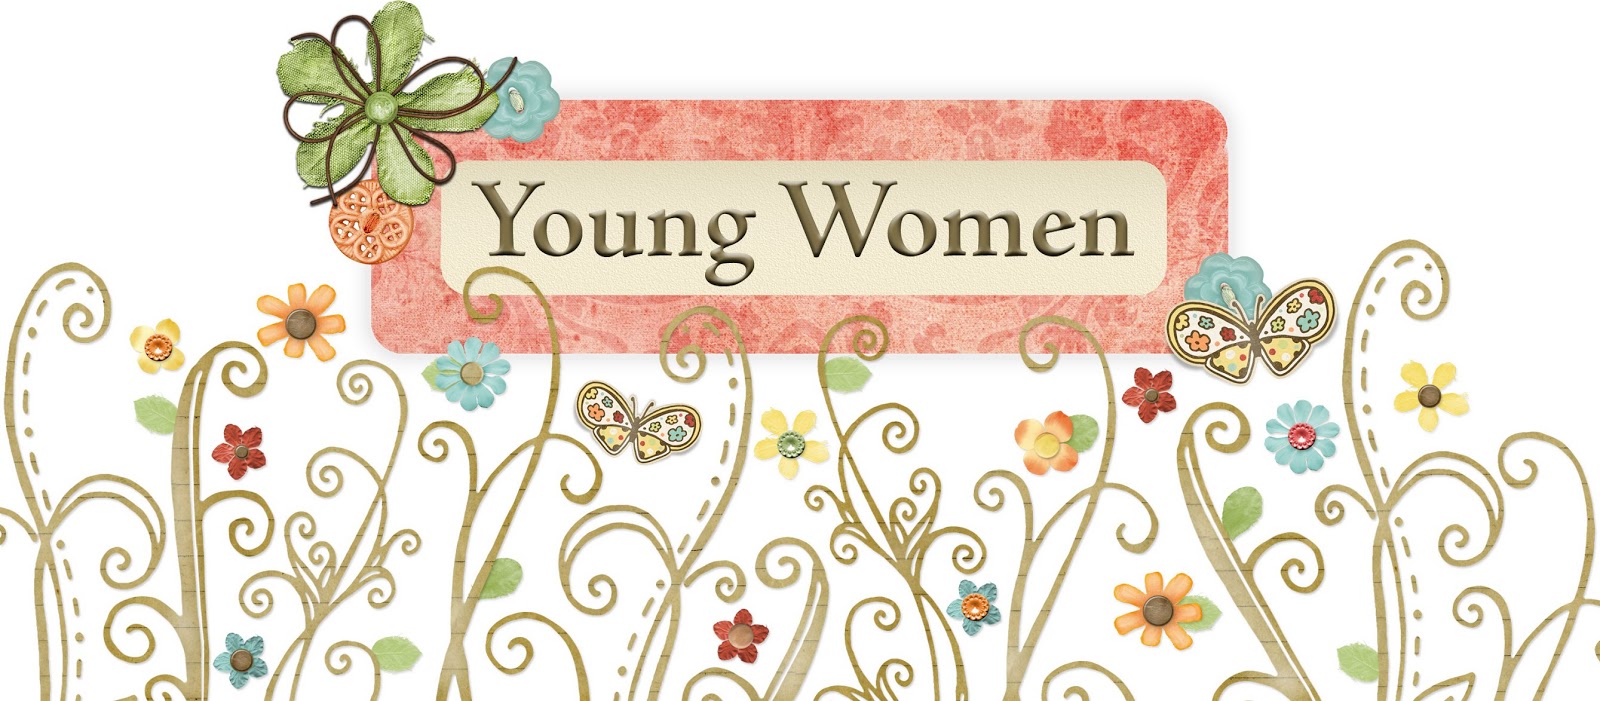 We Are Lds Young Women